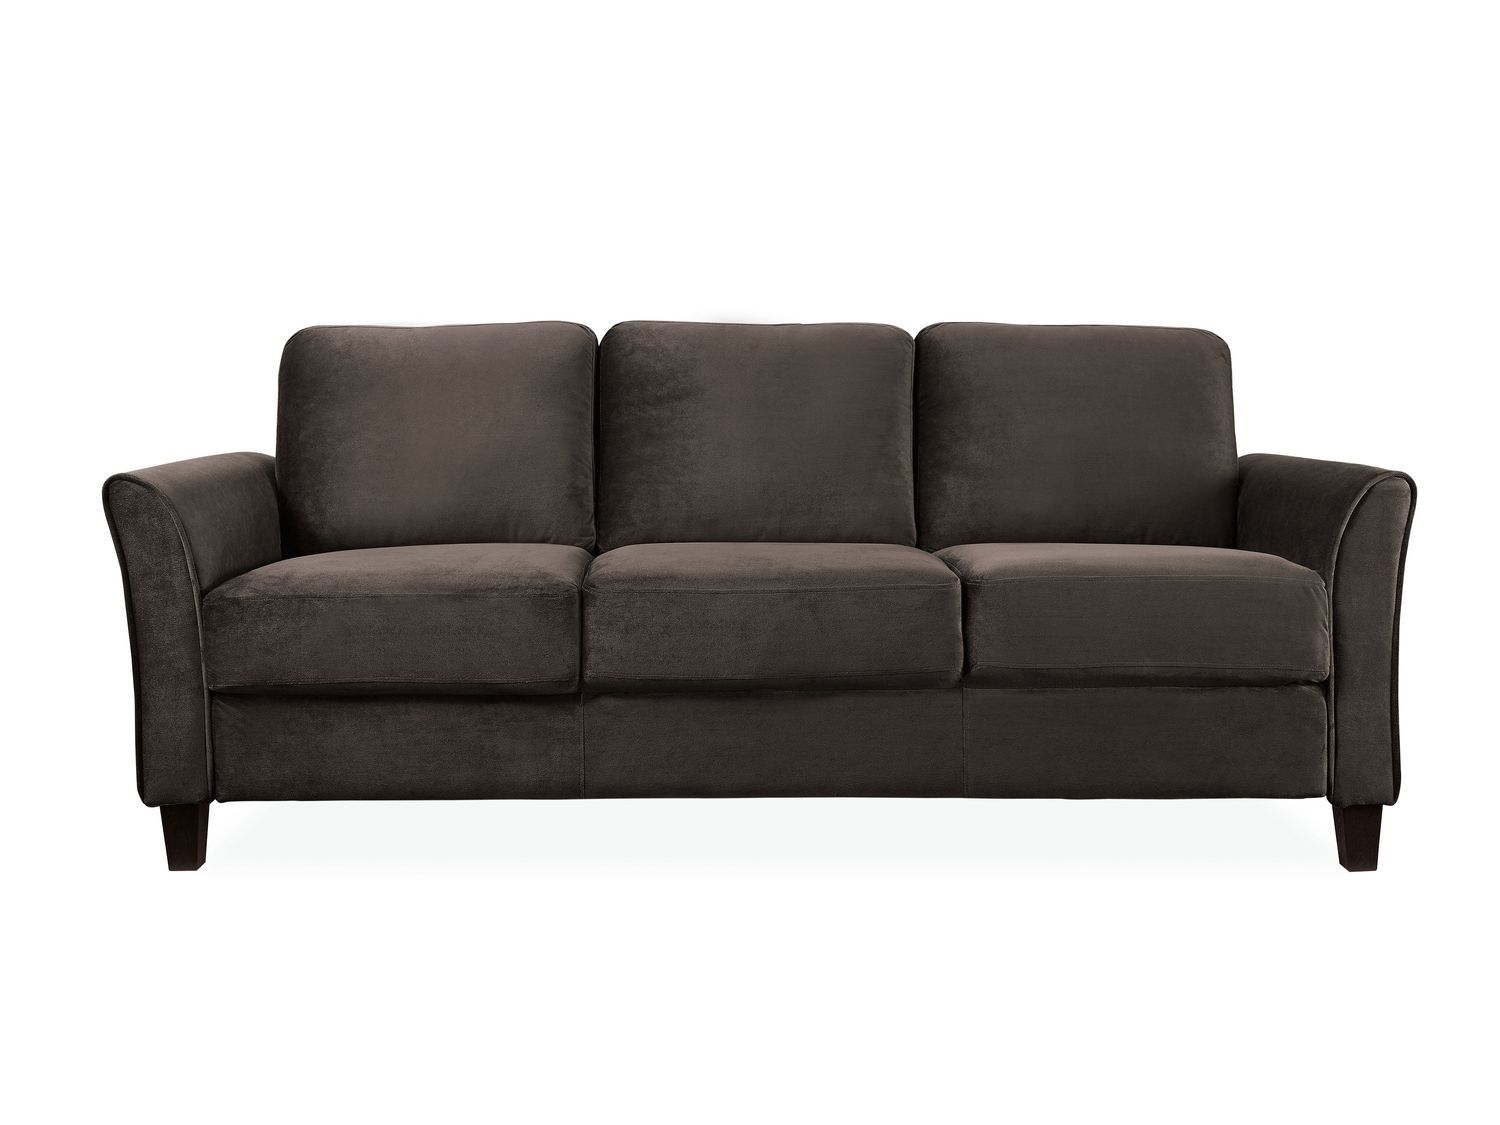 Sectional Sofas & Living Room Sets For Home | Walmart Canada With Sectional Sofas At Barrie (View 9 of 15)